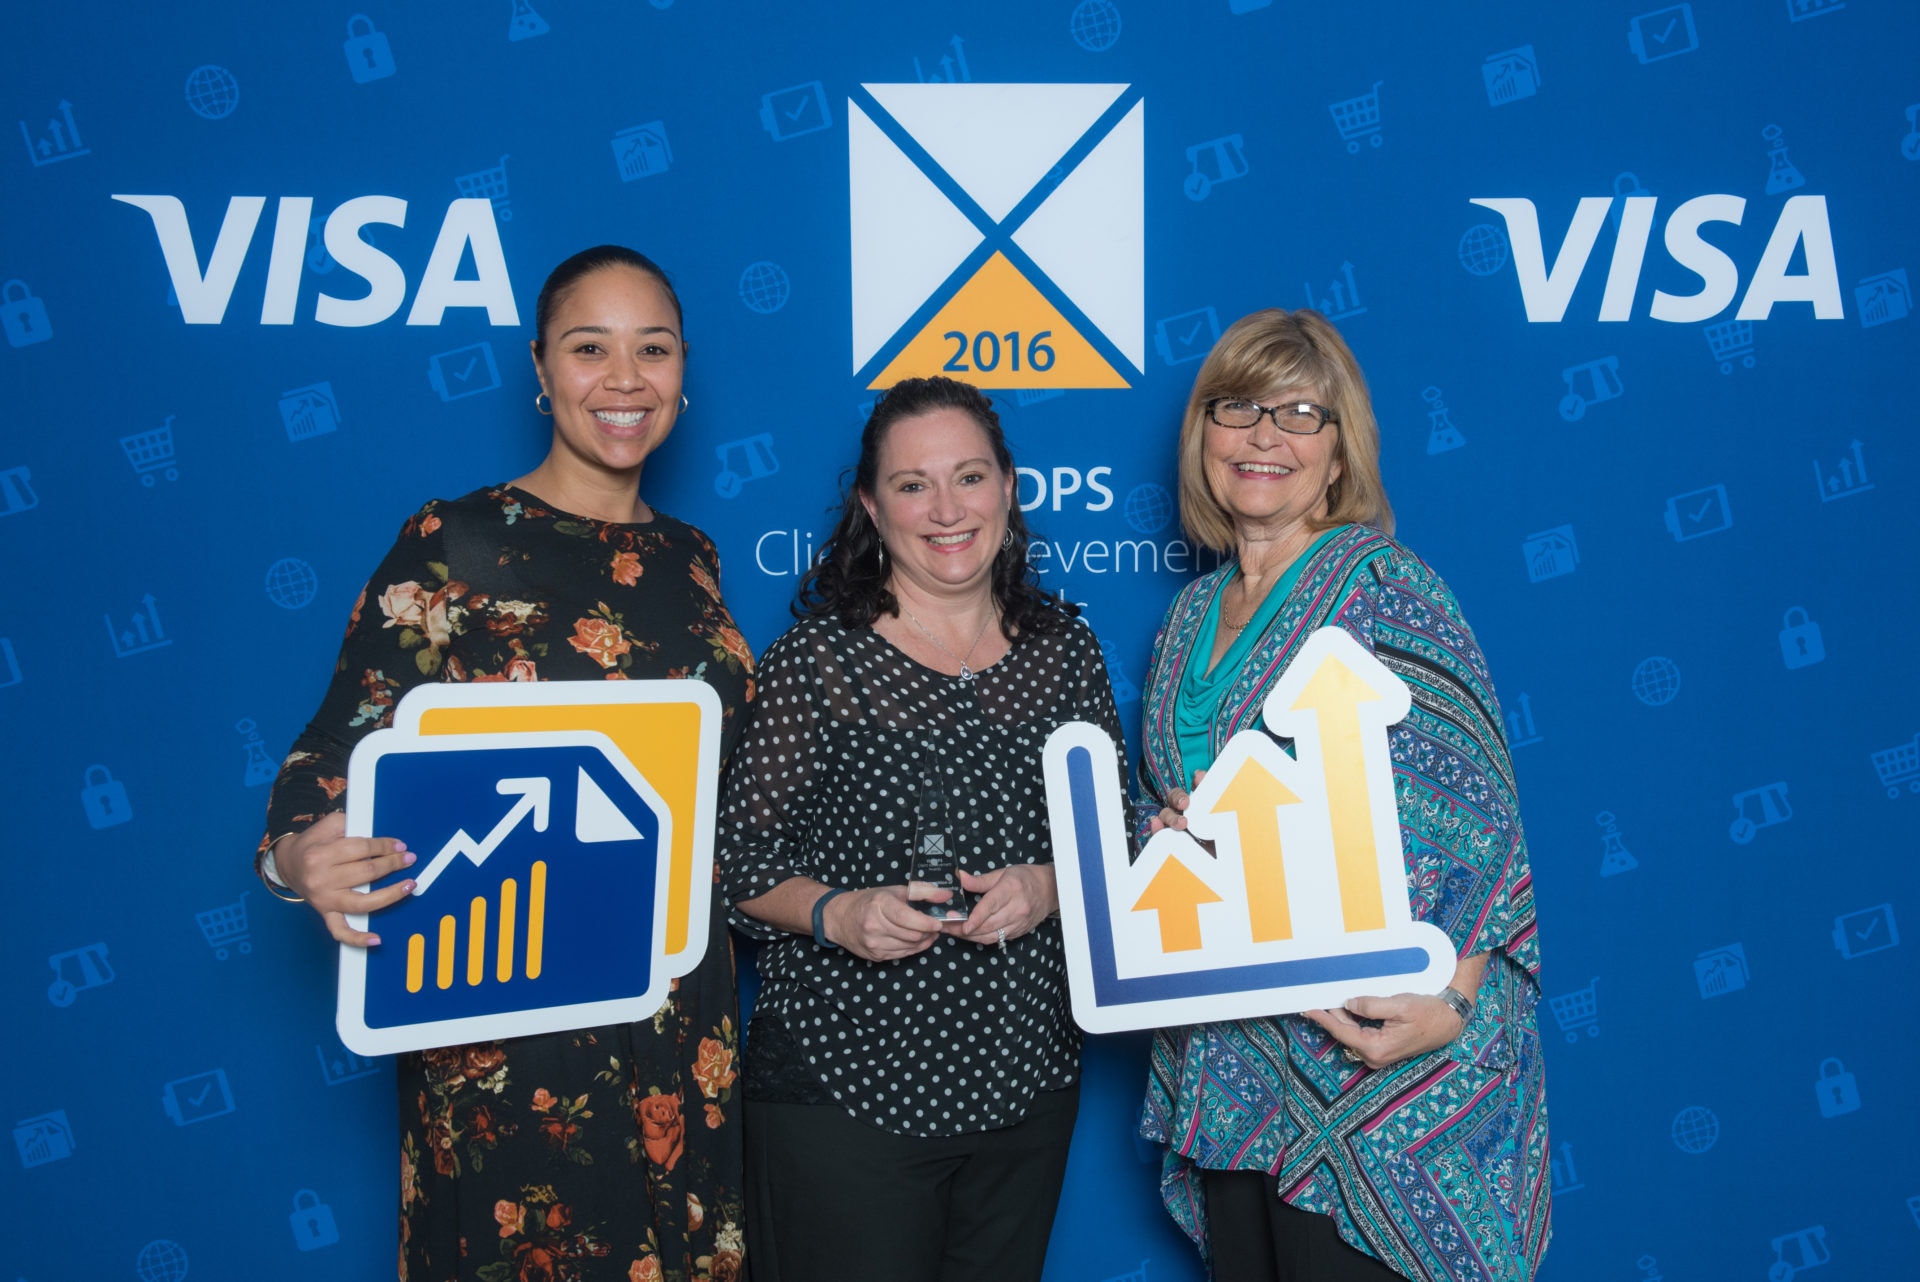 BBVA Compass' Melissa Smith (middle) and Wanda Birge (right) pose with Madolyn Street, Visa DSP Account Manager, at the 2016 Visa DPS Client Achievement award ceremony.